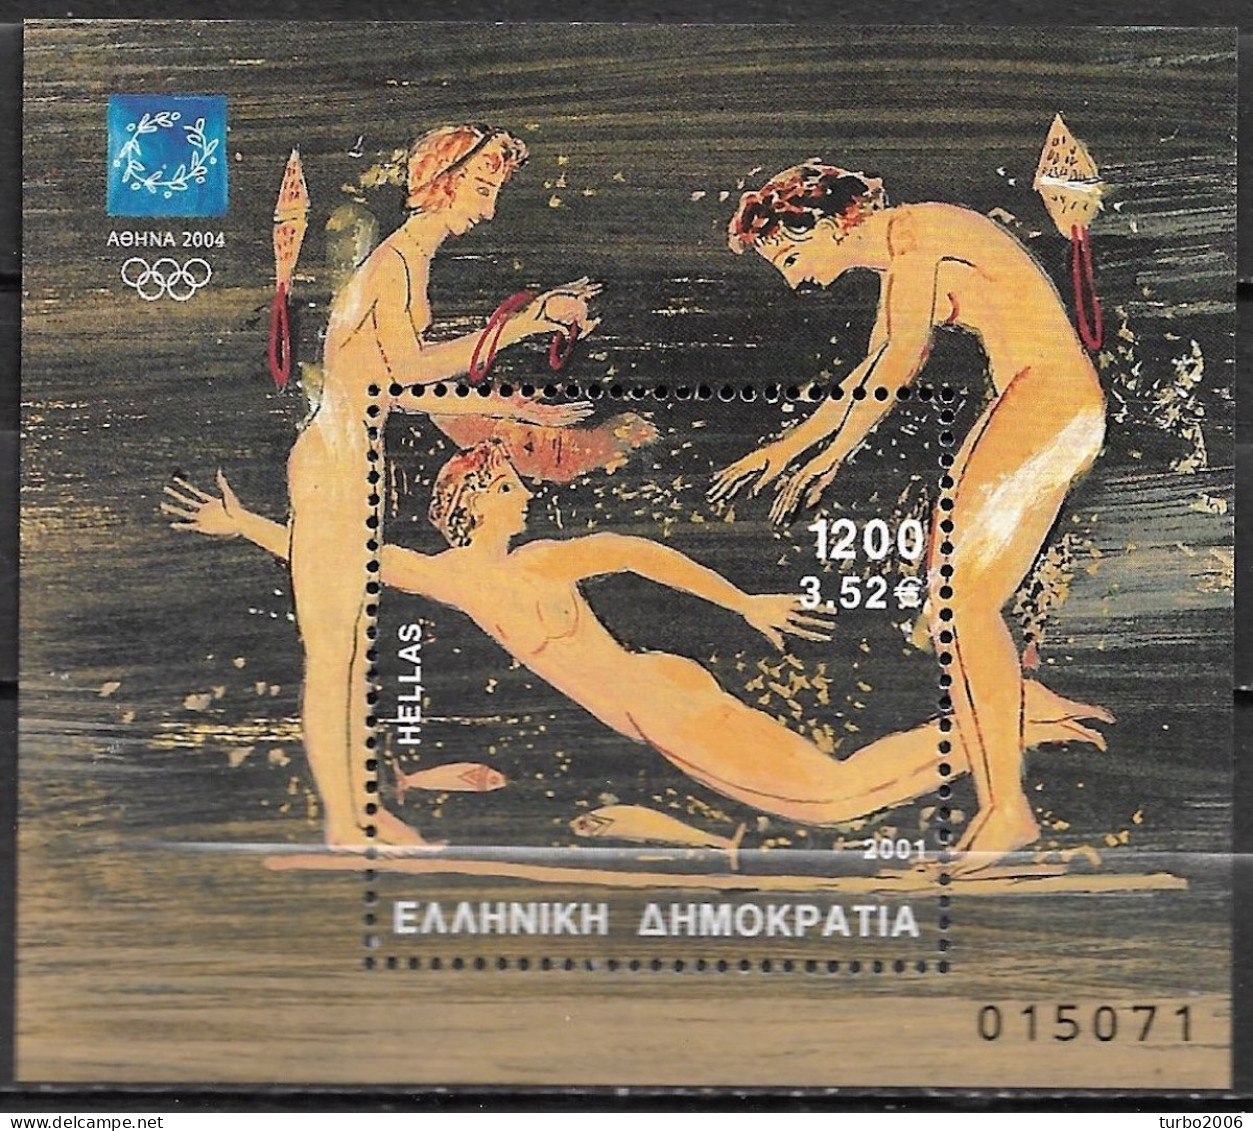 GREECE 2001 Athens 2004 2nd Issue Olympic Games Miniature Sheet Dr. 1200 Vl. B 19 MNH - Blocks & Sheetlets